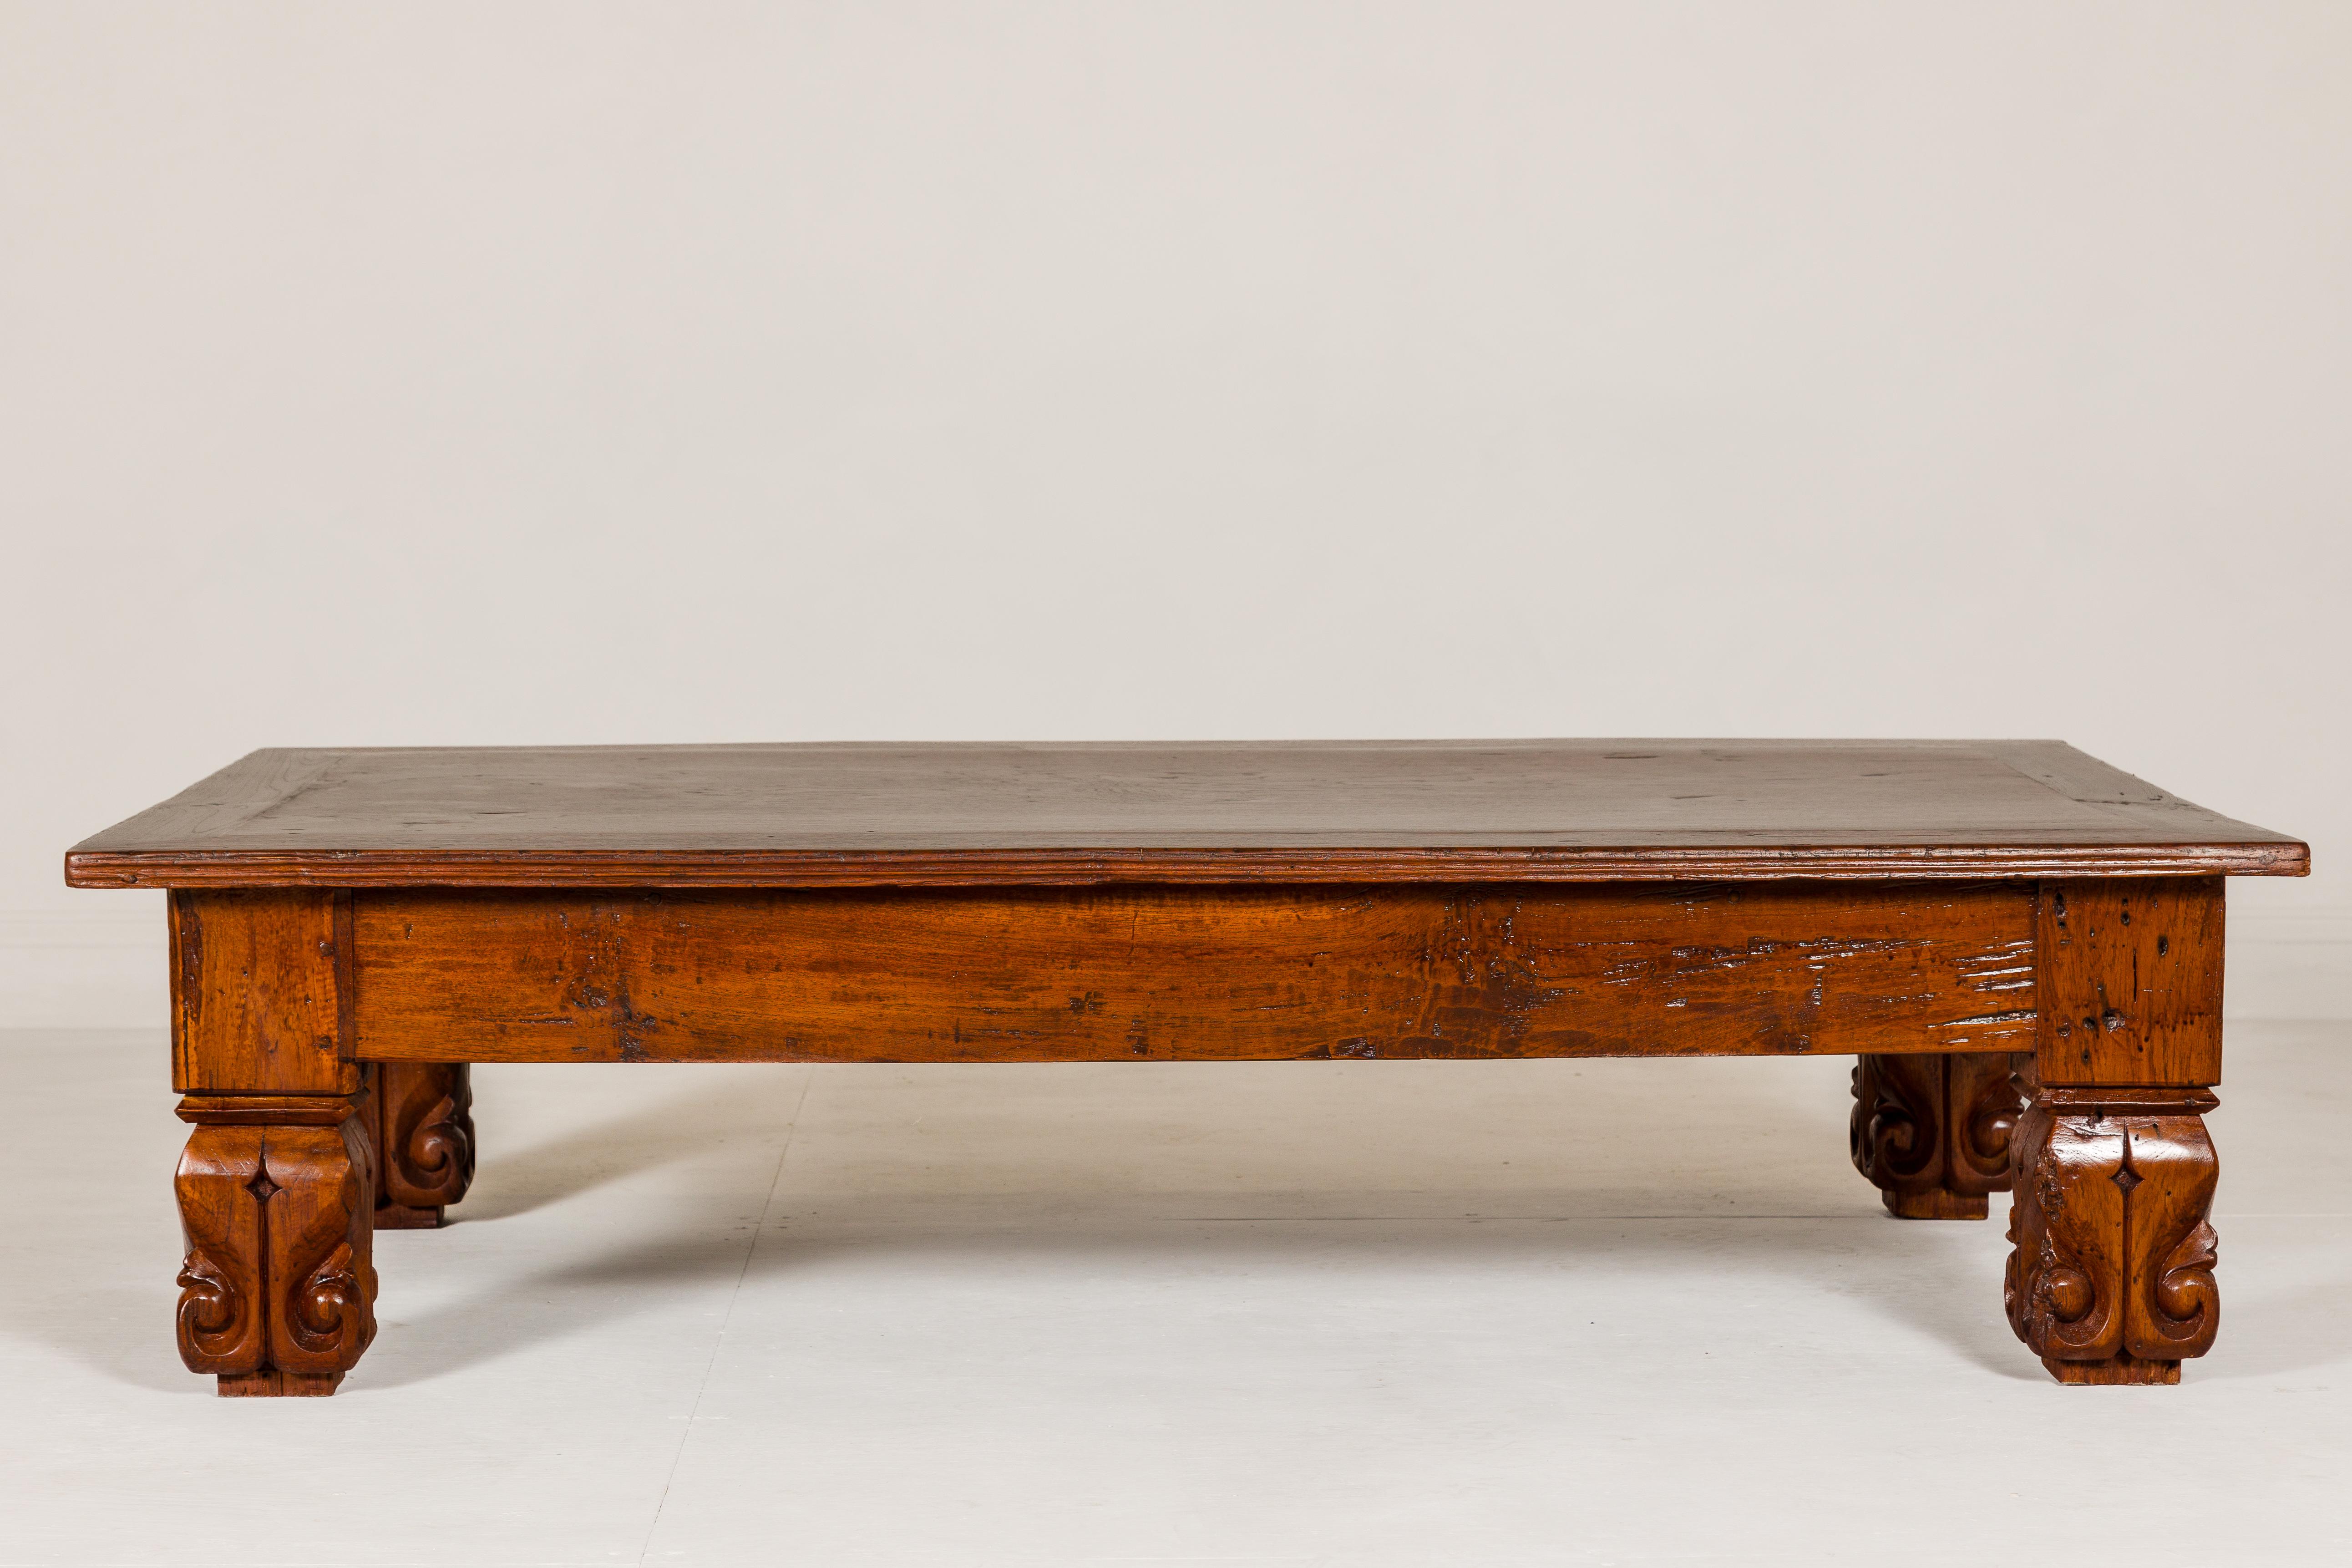 19th Century Teak Brown Wood Low Coffee Table with Scroll Carved Legs For Sale 1